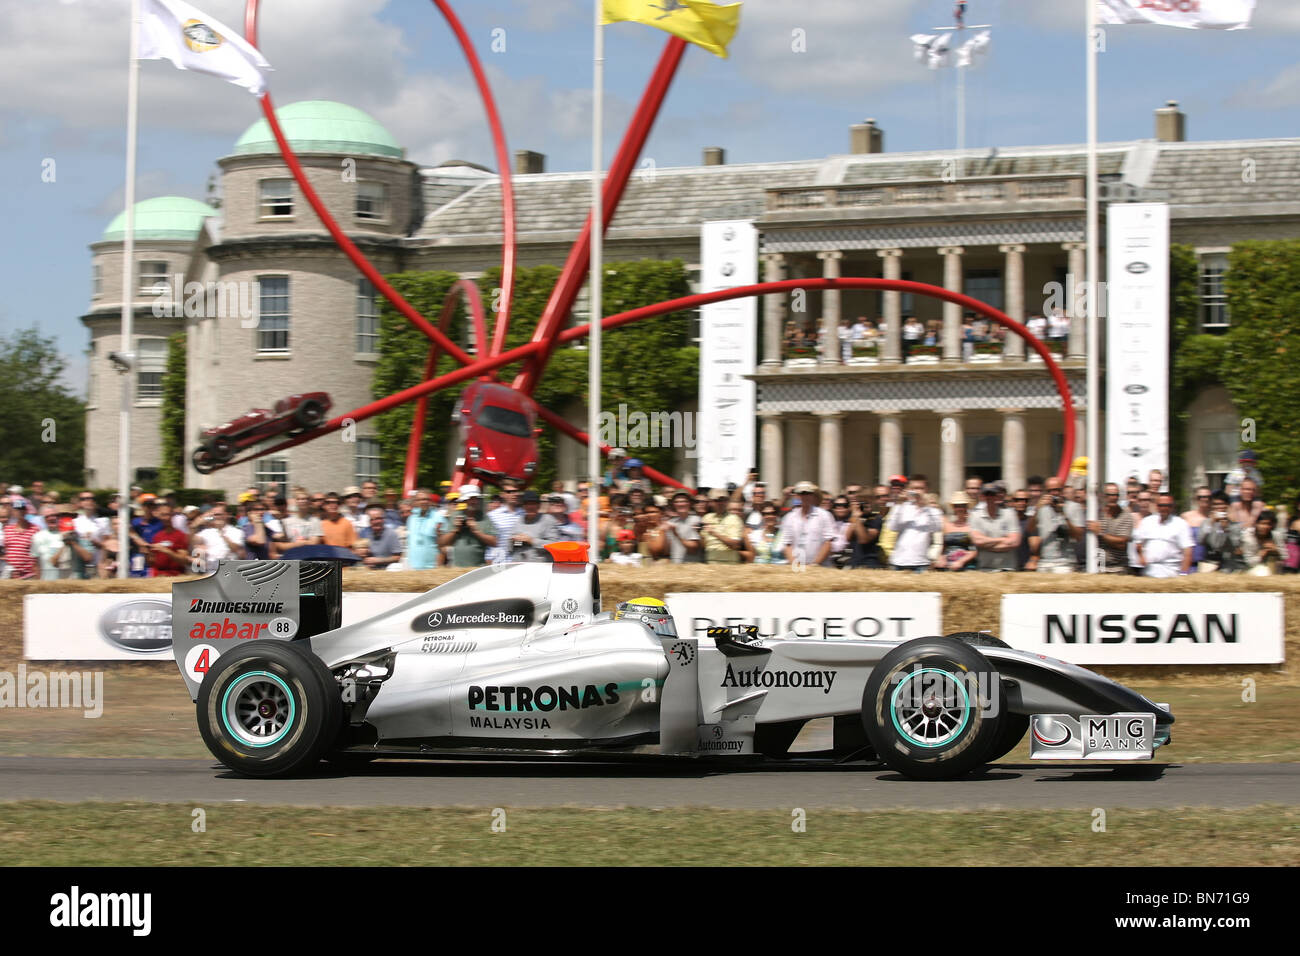 Nico Rosberg drives his Mercedes GP F1 car at the Goodwood Festival of Speed 2010. Stock Photo